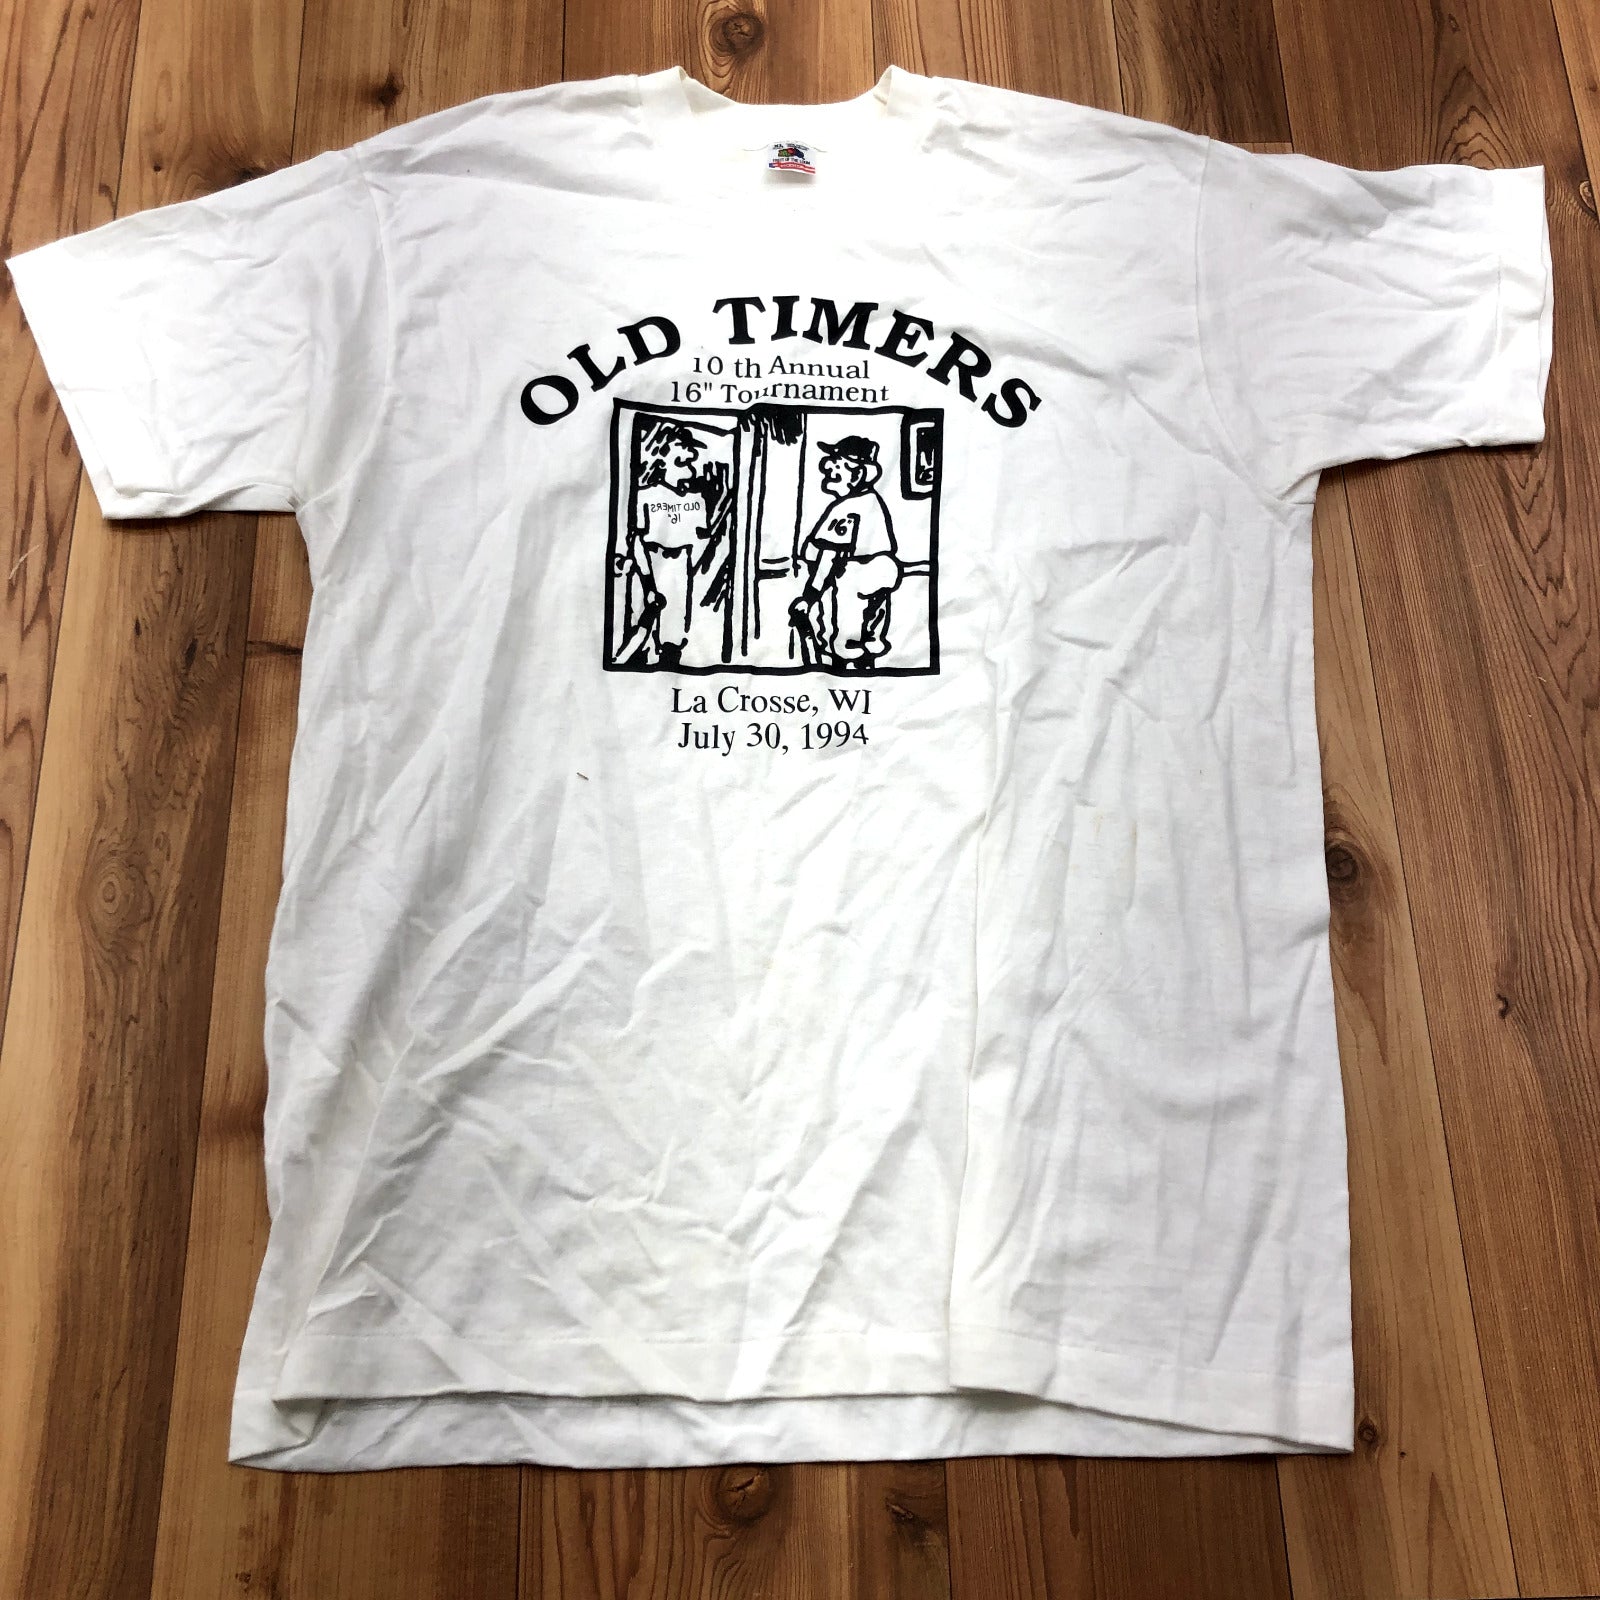 Vintage FOTL White Old Timers 10th Annual 16 Tournament July 1994 Adult Size XL